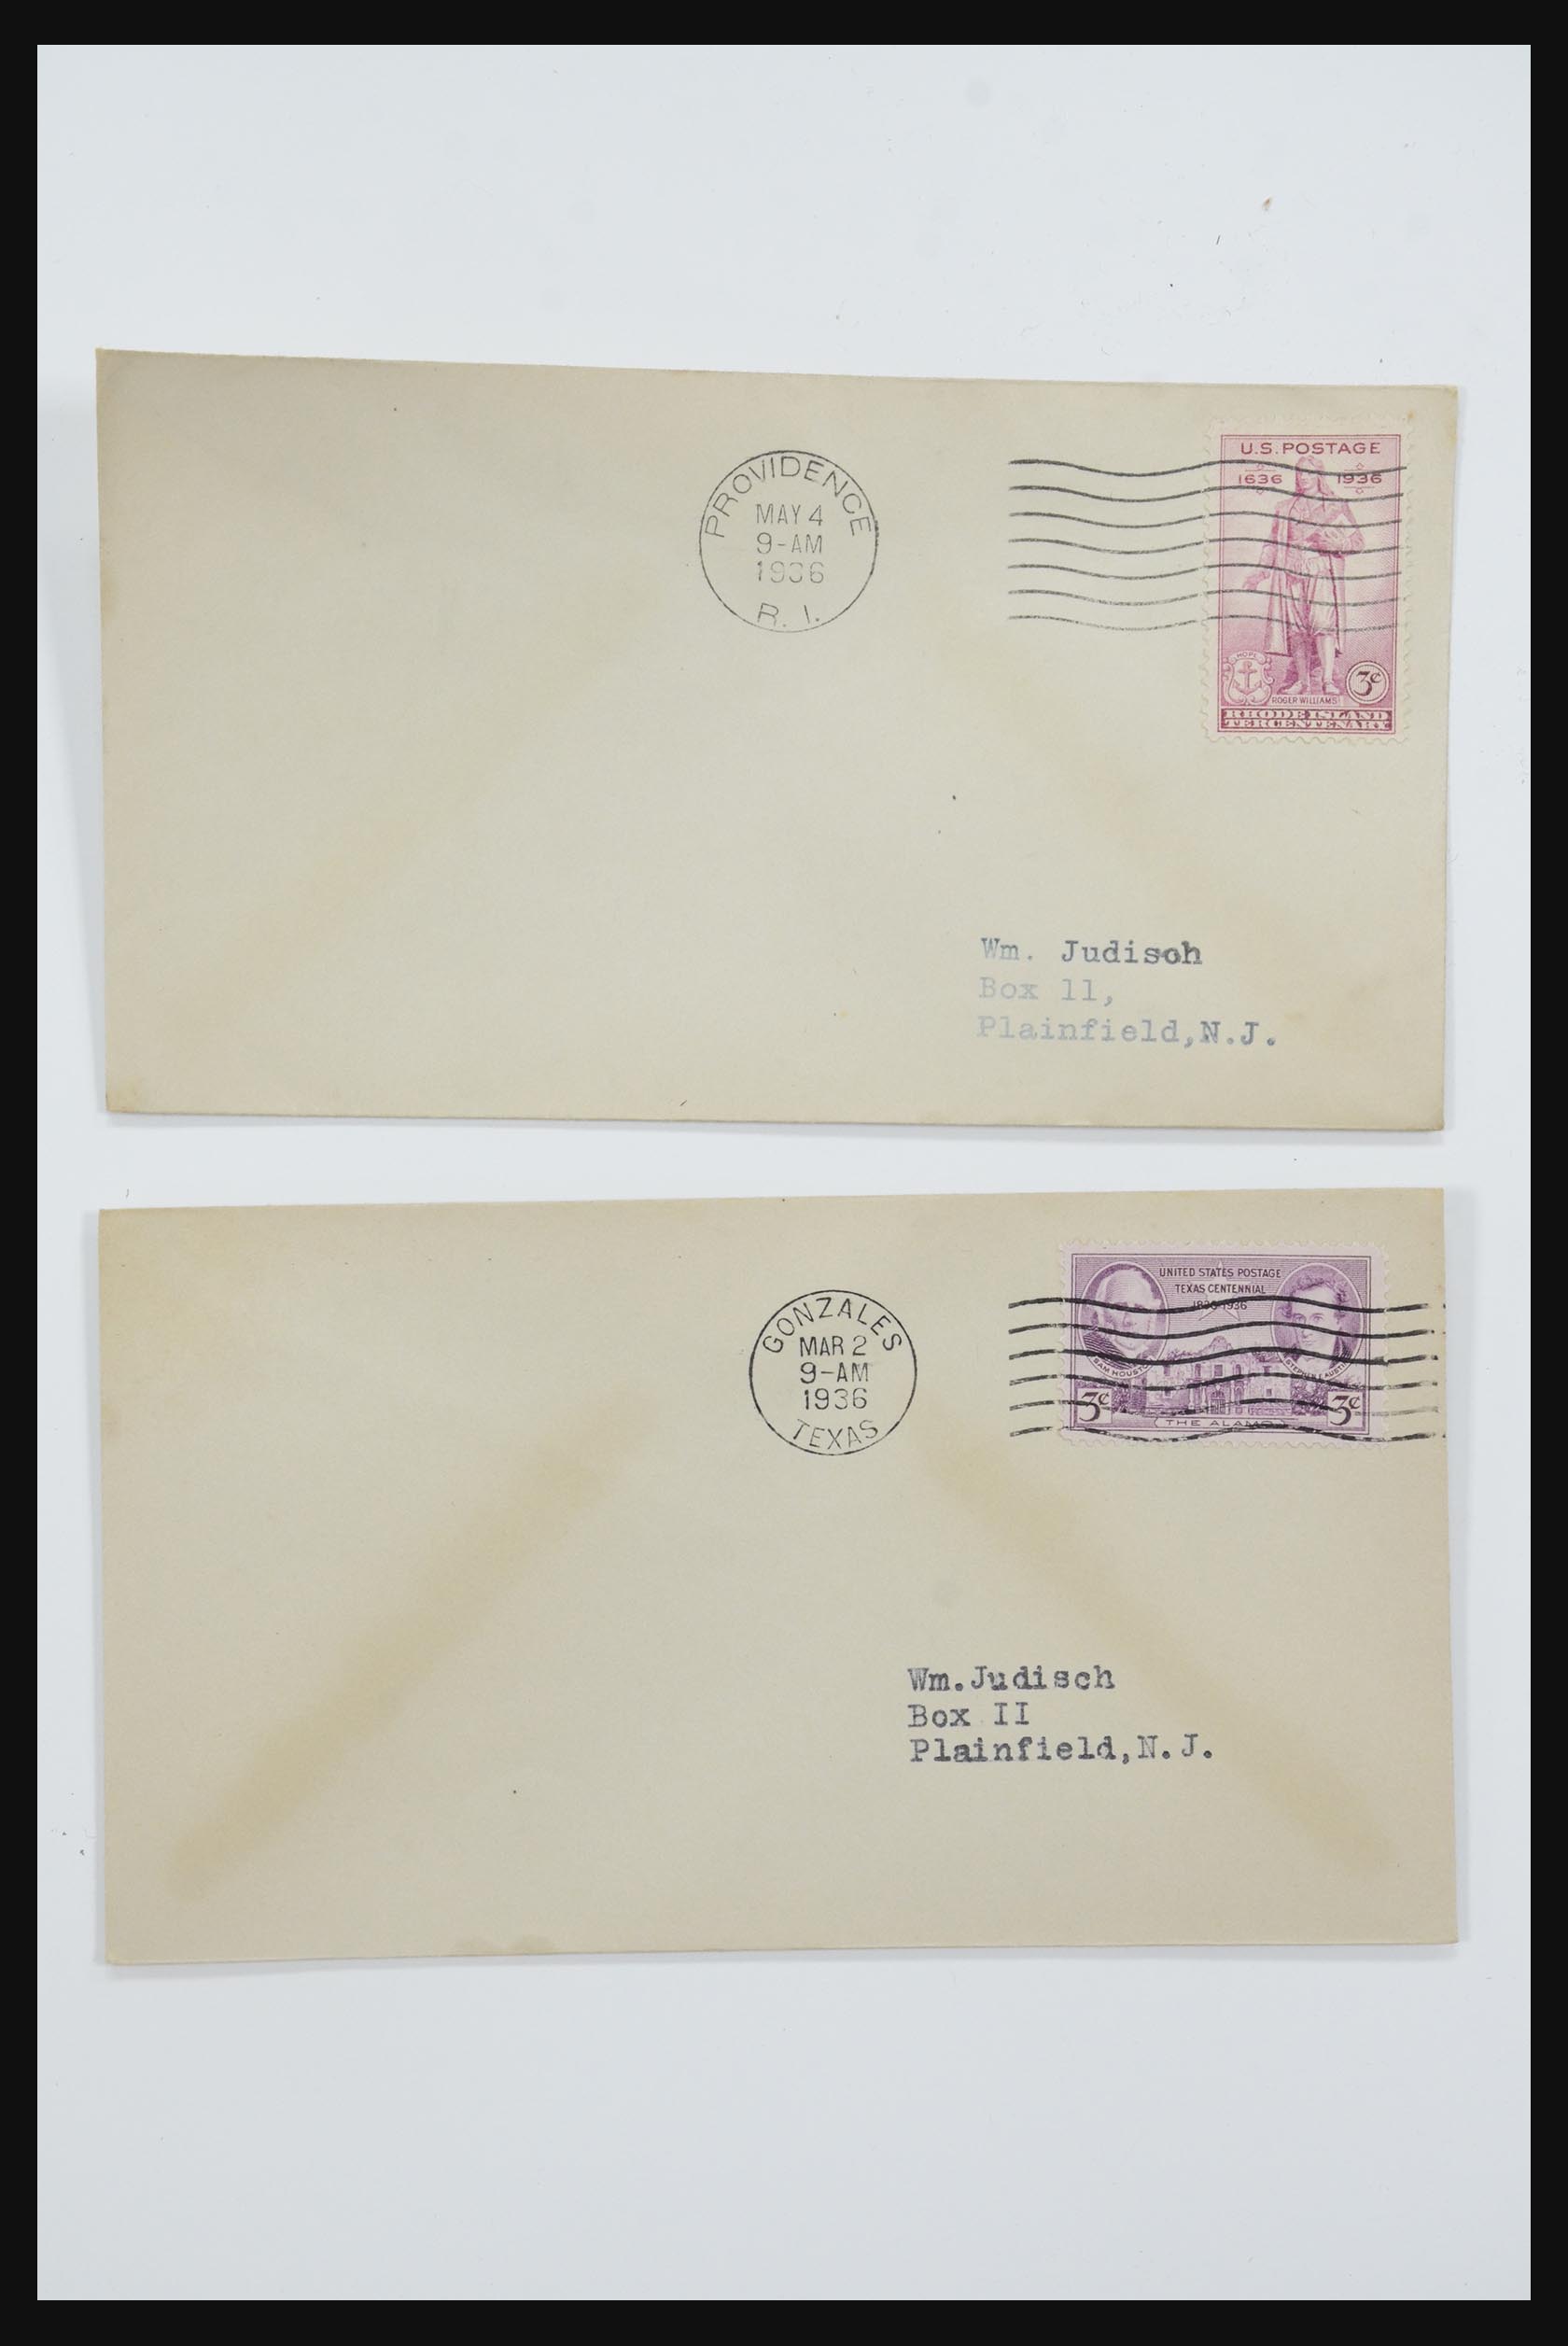 31728 581 - 31728 USA covers and FDC's 1880-1980.